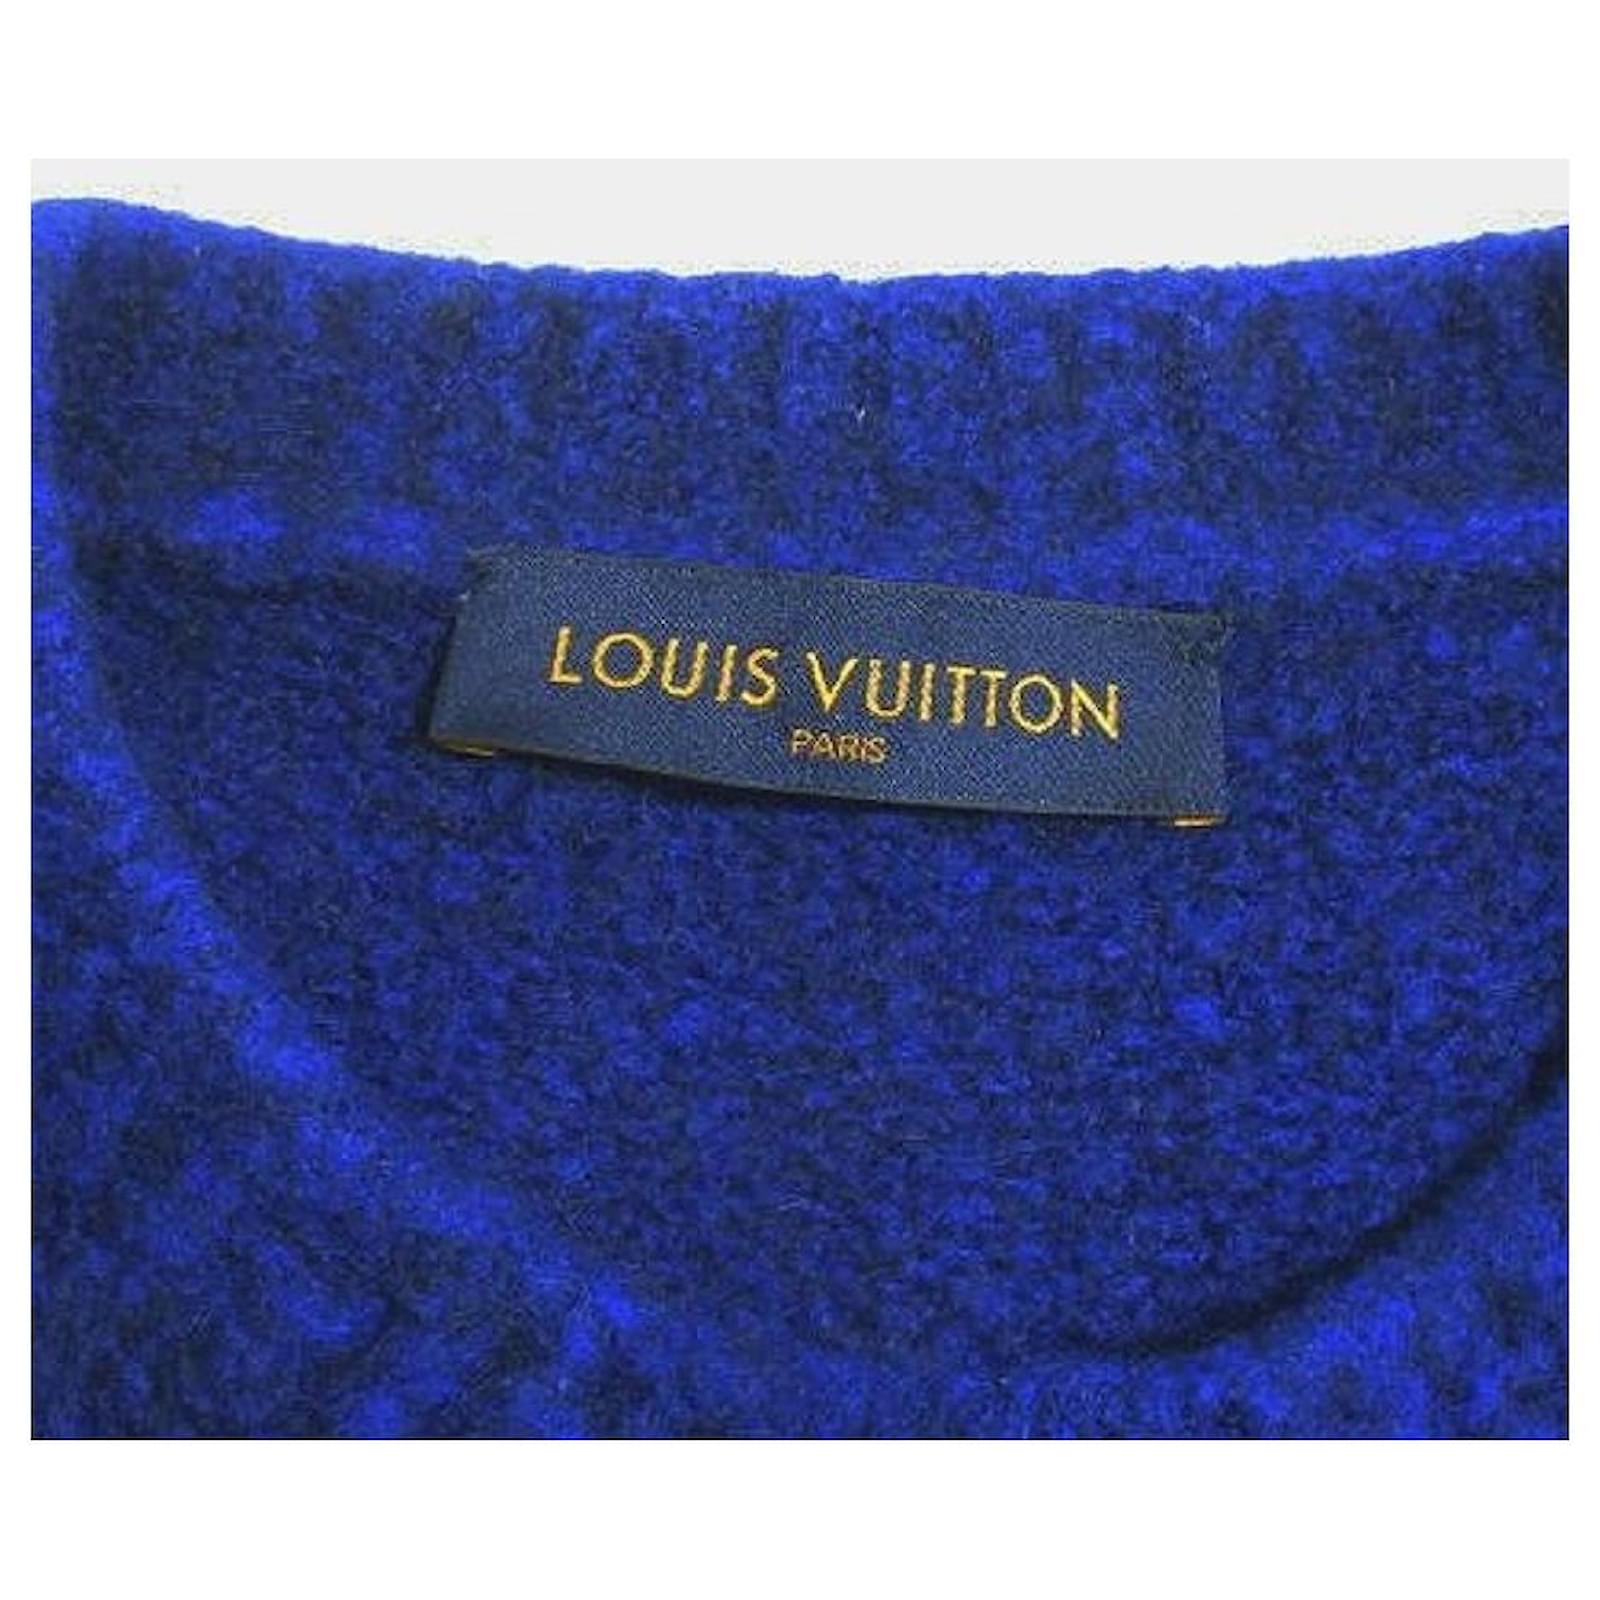 Louis Vuitton Blue Cotton and Wool Crew Neck Sweater - size S ○ Labellov ○  Buy and Sell Authentic Luxury